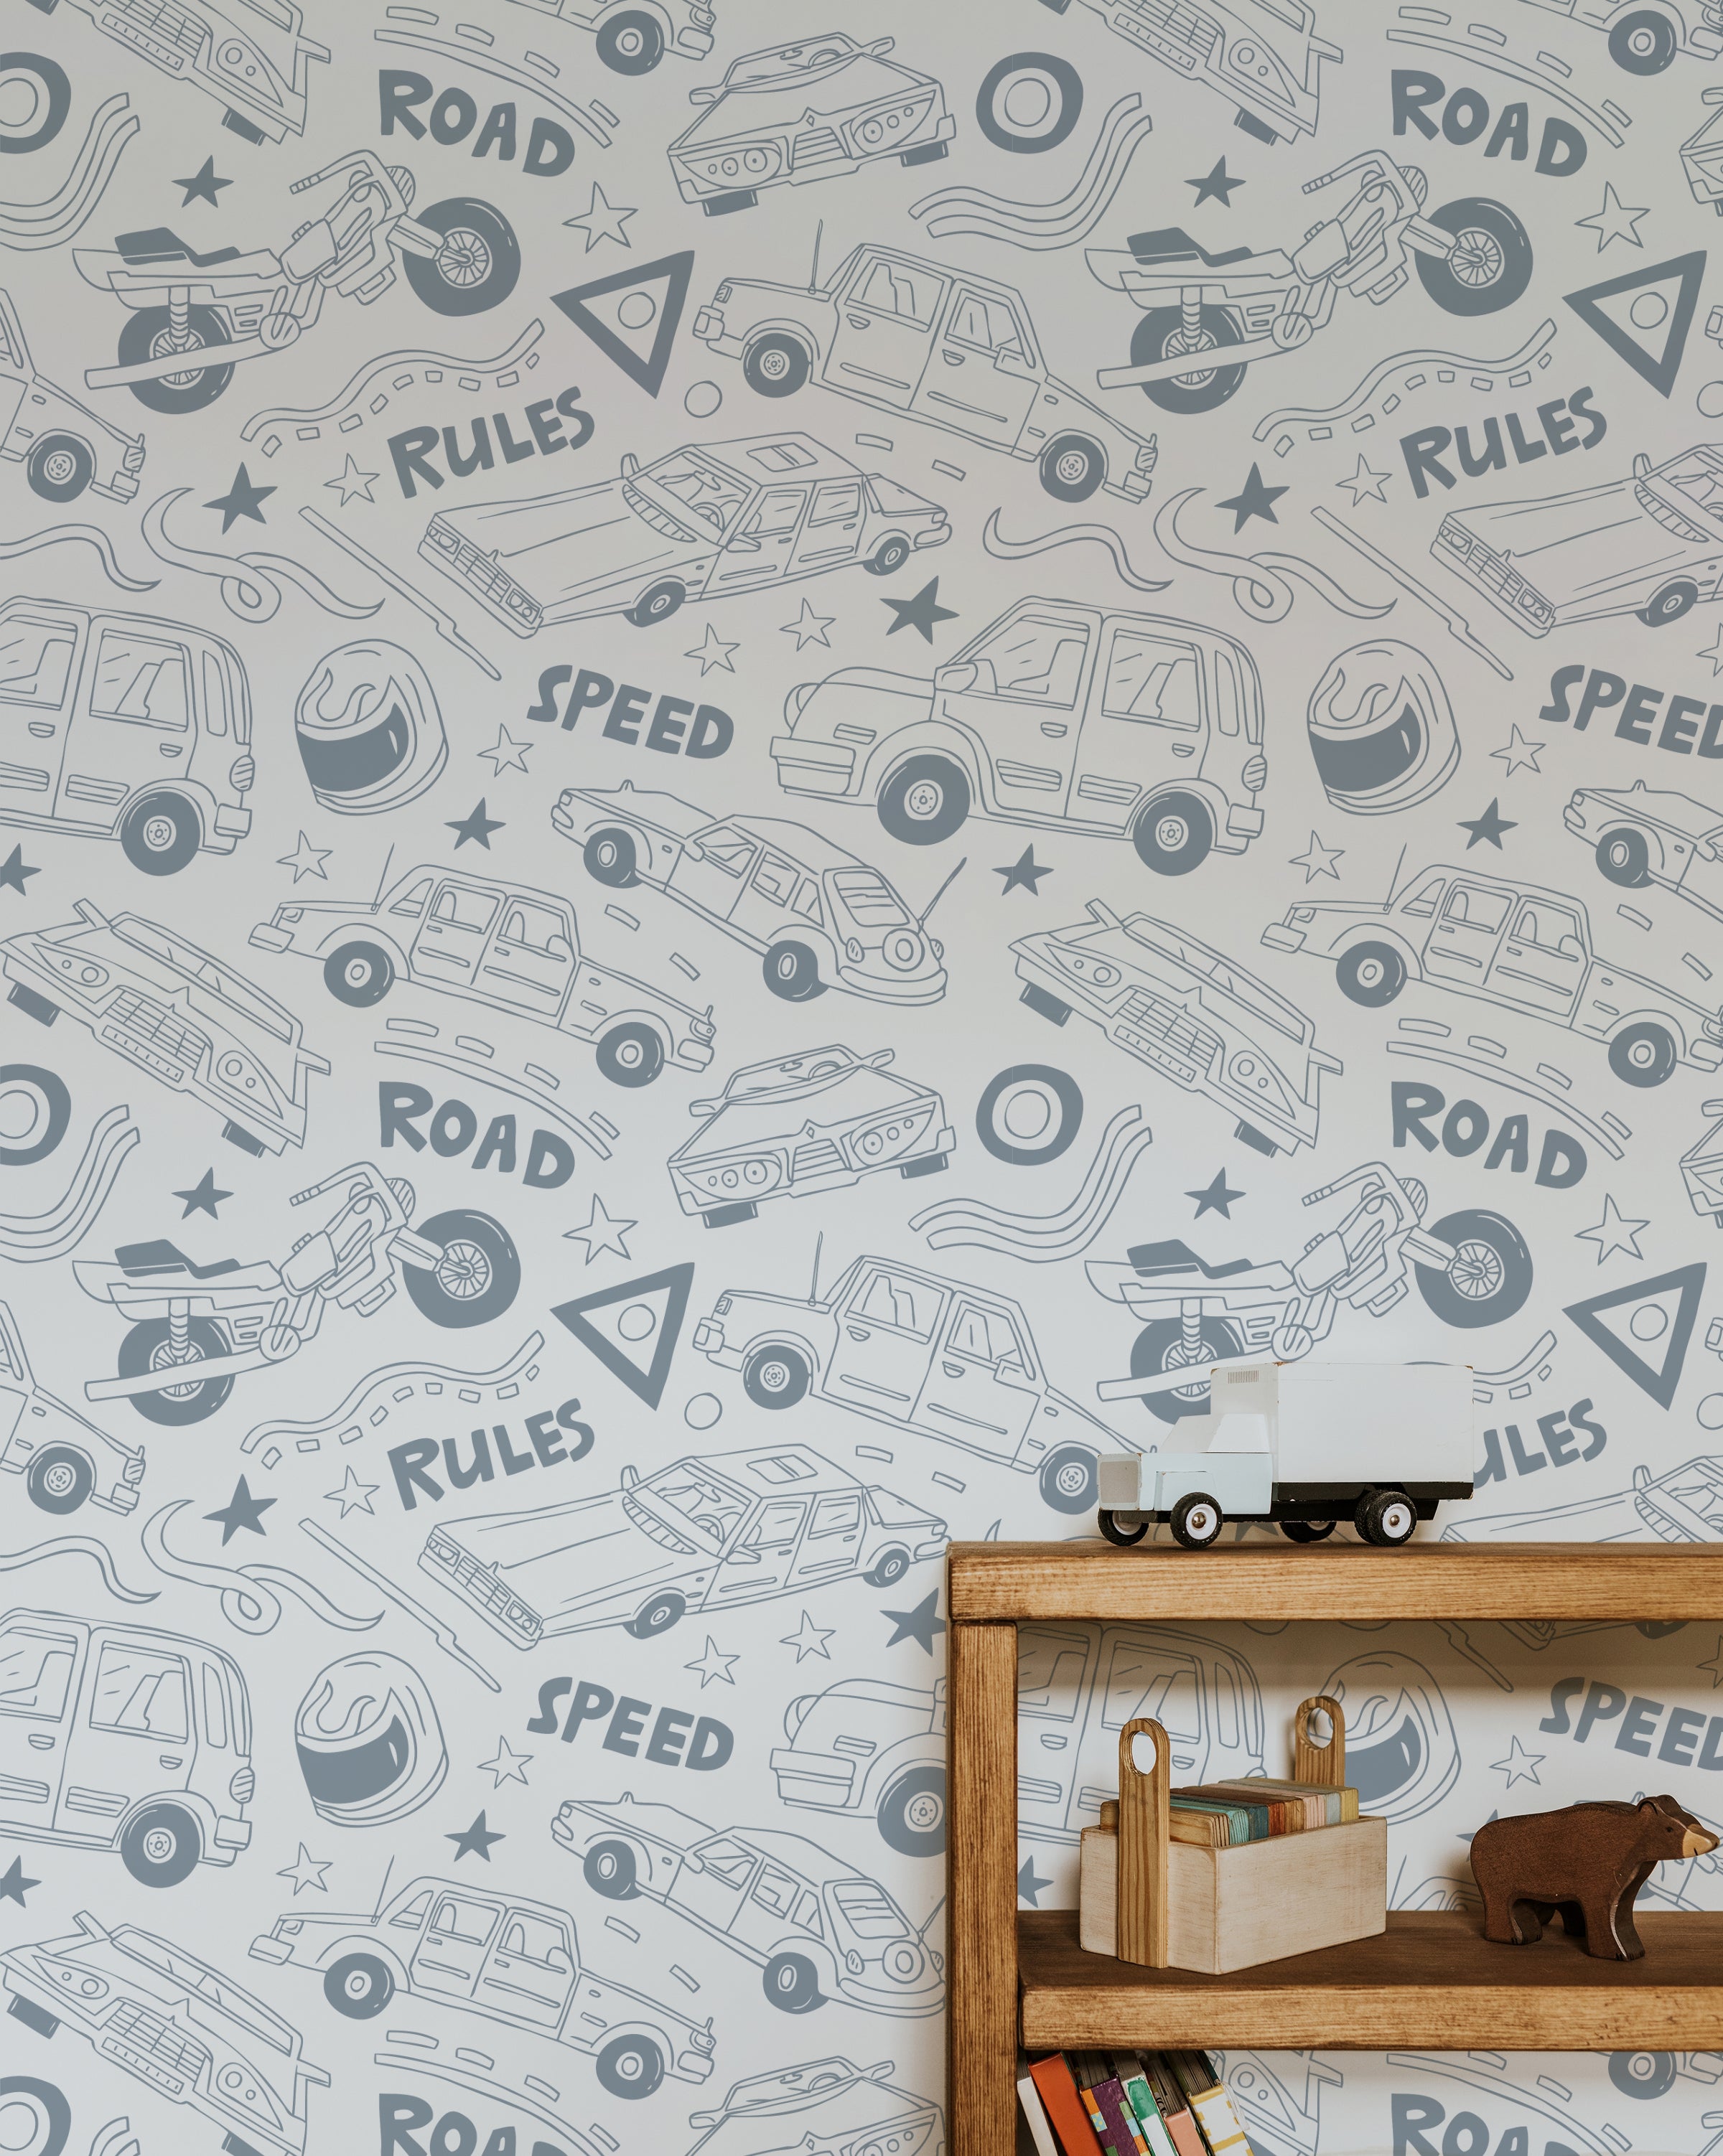 A children's room setup featuring a wooden shelf with toys and books. The background features Speedway Adventures Wallpaper with playful illustrations of various vehicles, roads, and road signs in light gray on a white background, creating a fun and energetic atmosphere for kids.